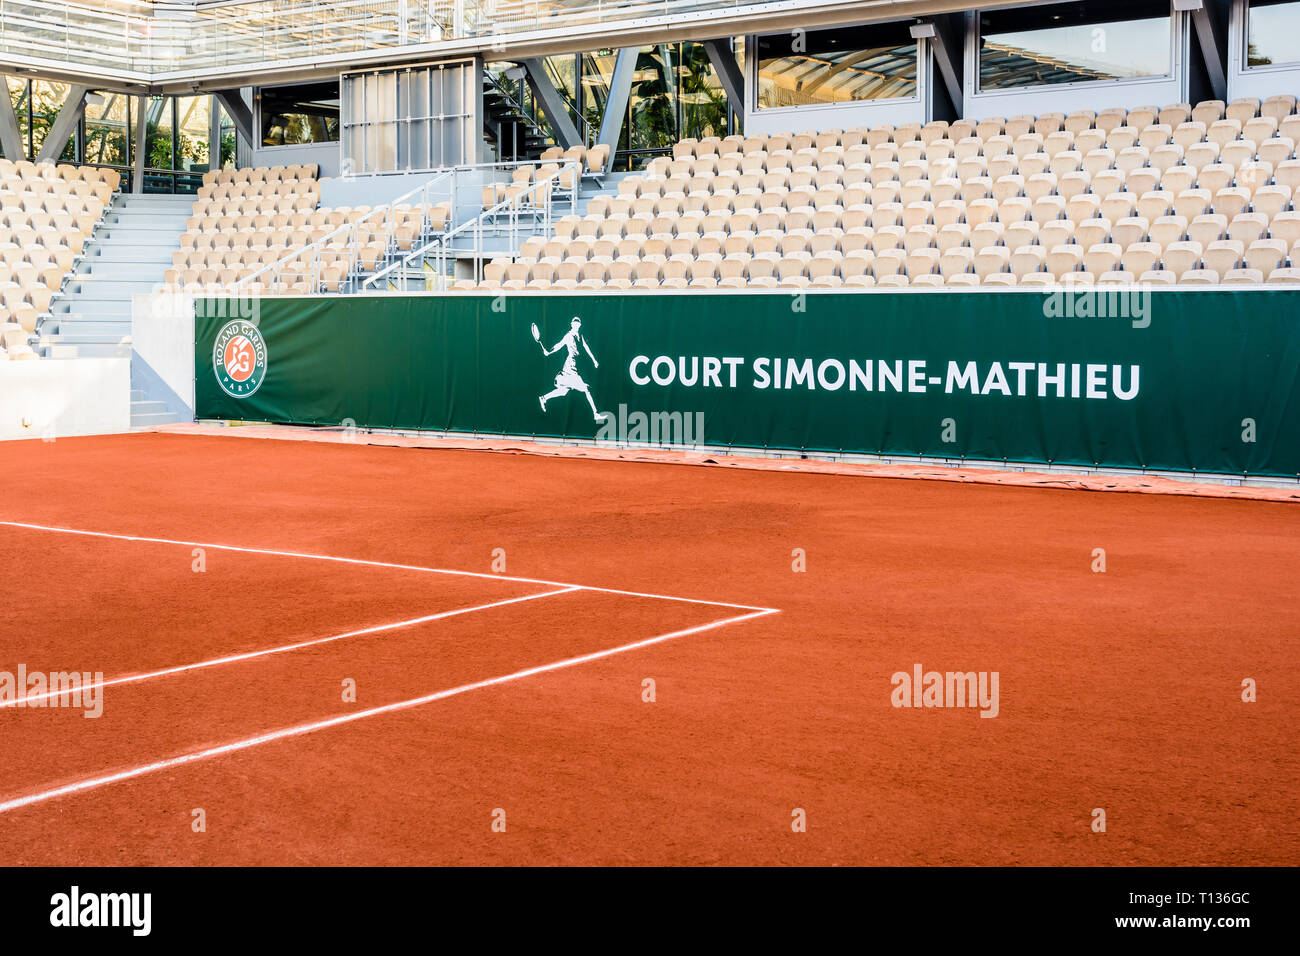 The Simonne Mathieu tennis clay court is the latest of Roland Garros stadium in Paris, where the French Open takes place. Stock Photo